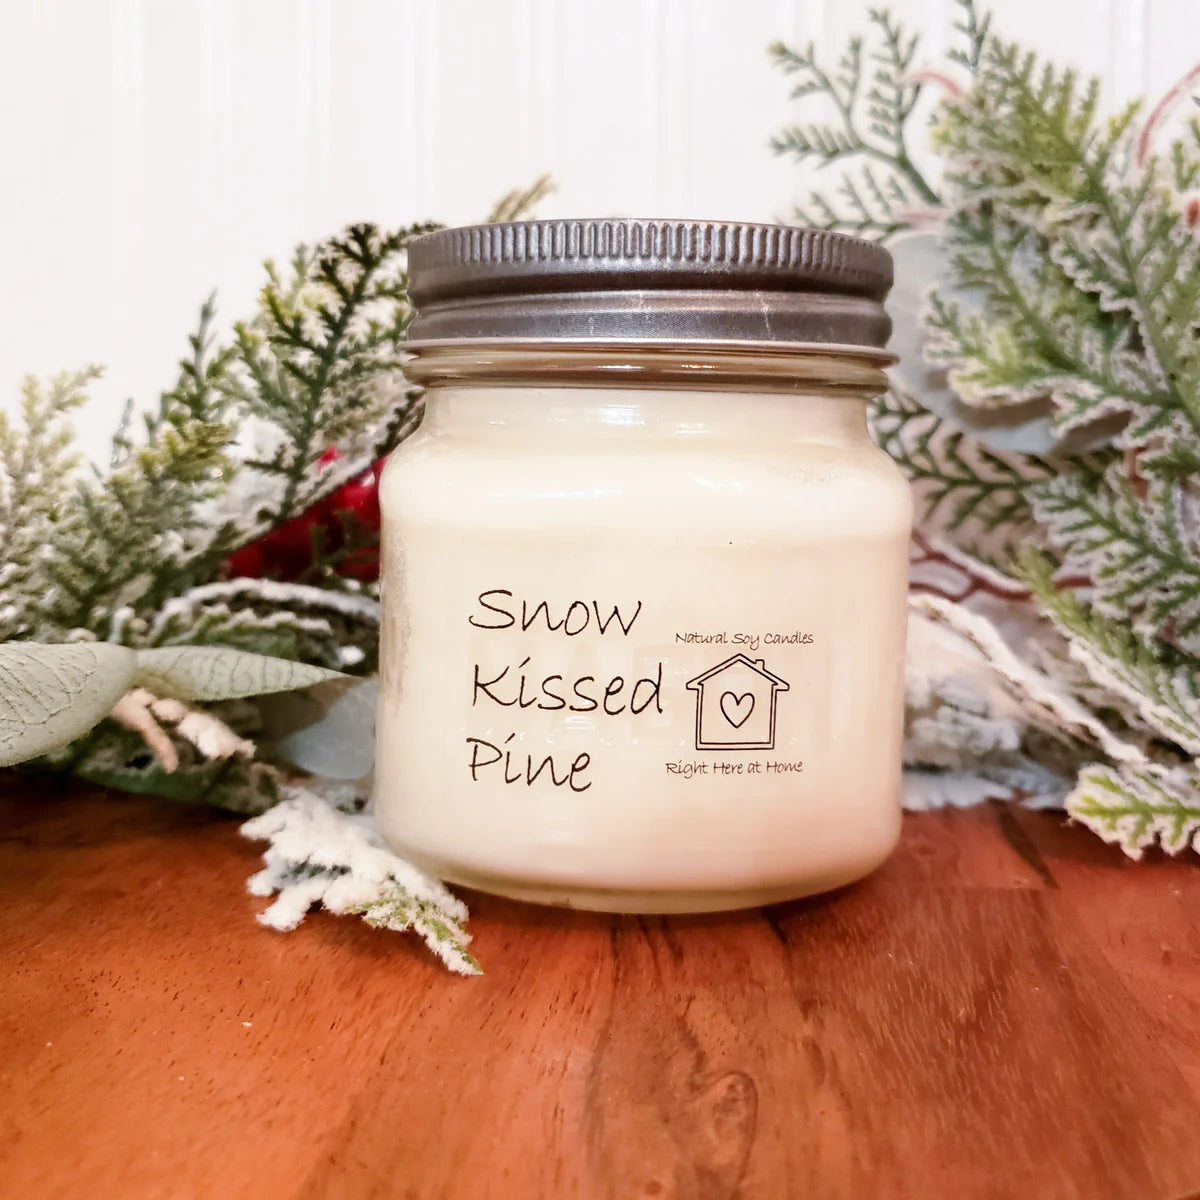 A scented candle named ‘Snow Kissed Pine’ on a table